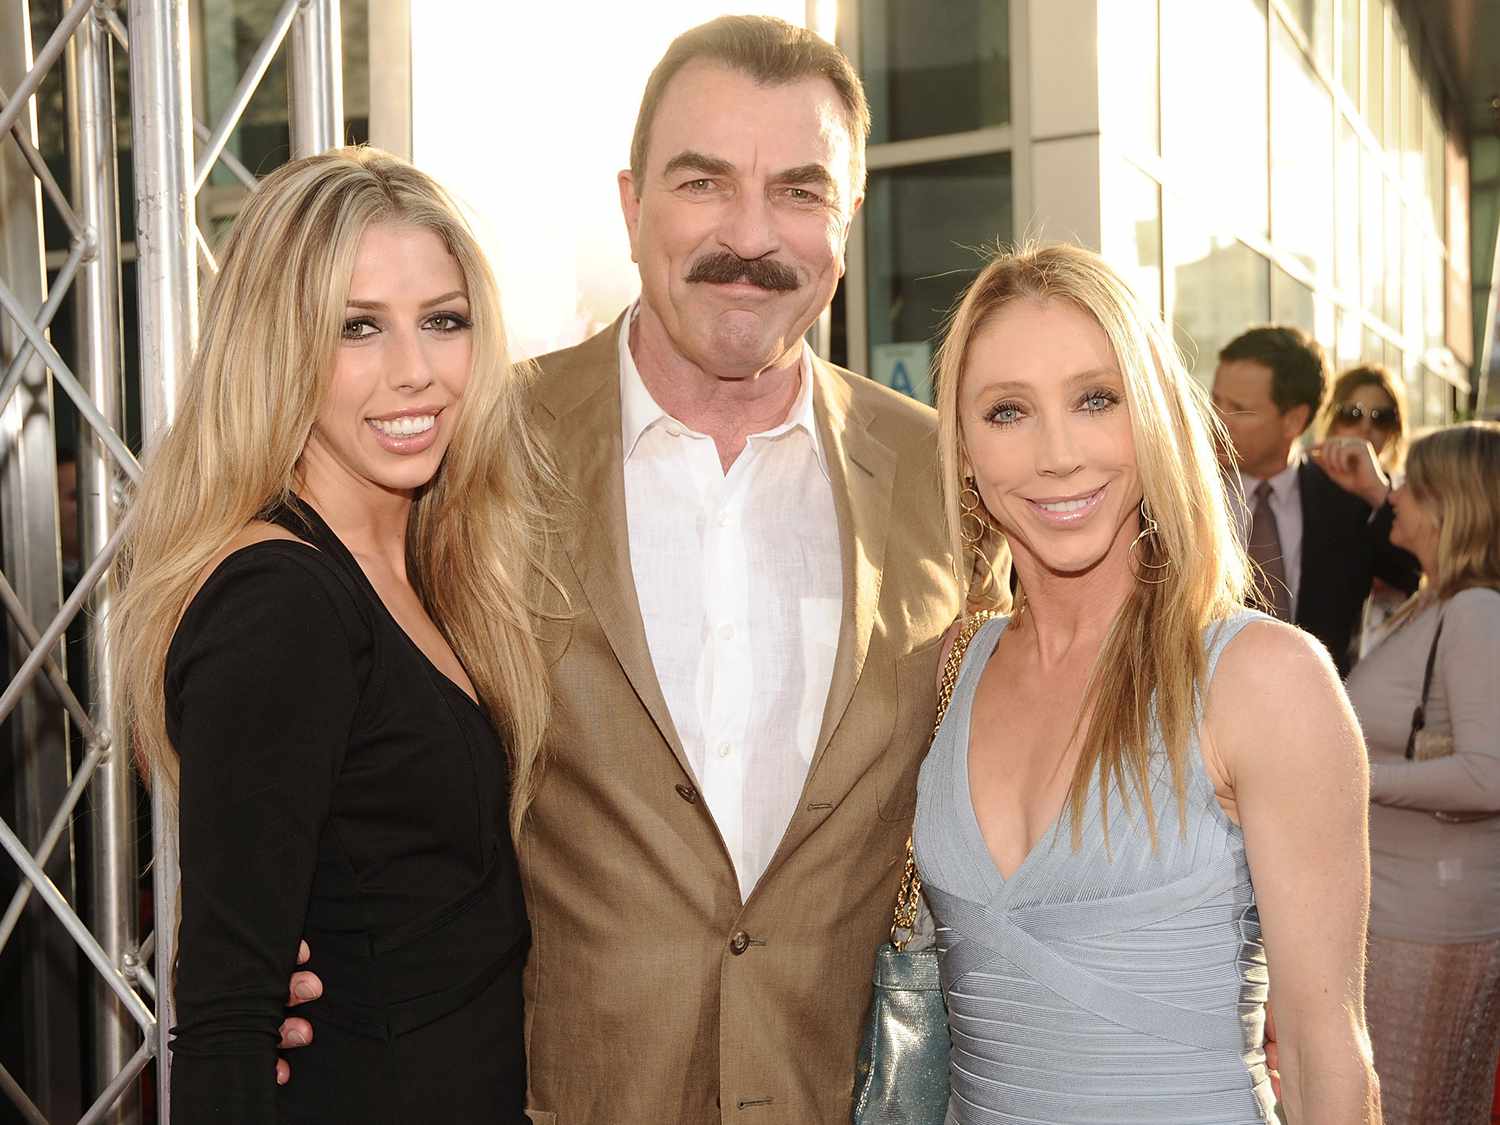 Hannah Selleck, Actor Tom Selleck and wife Jillie Mack arrives at the Los Angeles premiere of "Killers" held at ArcLight Cinemas Cinerama Dome on June 1, 2010 in Hollywood, California